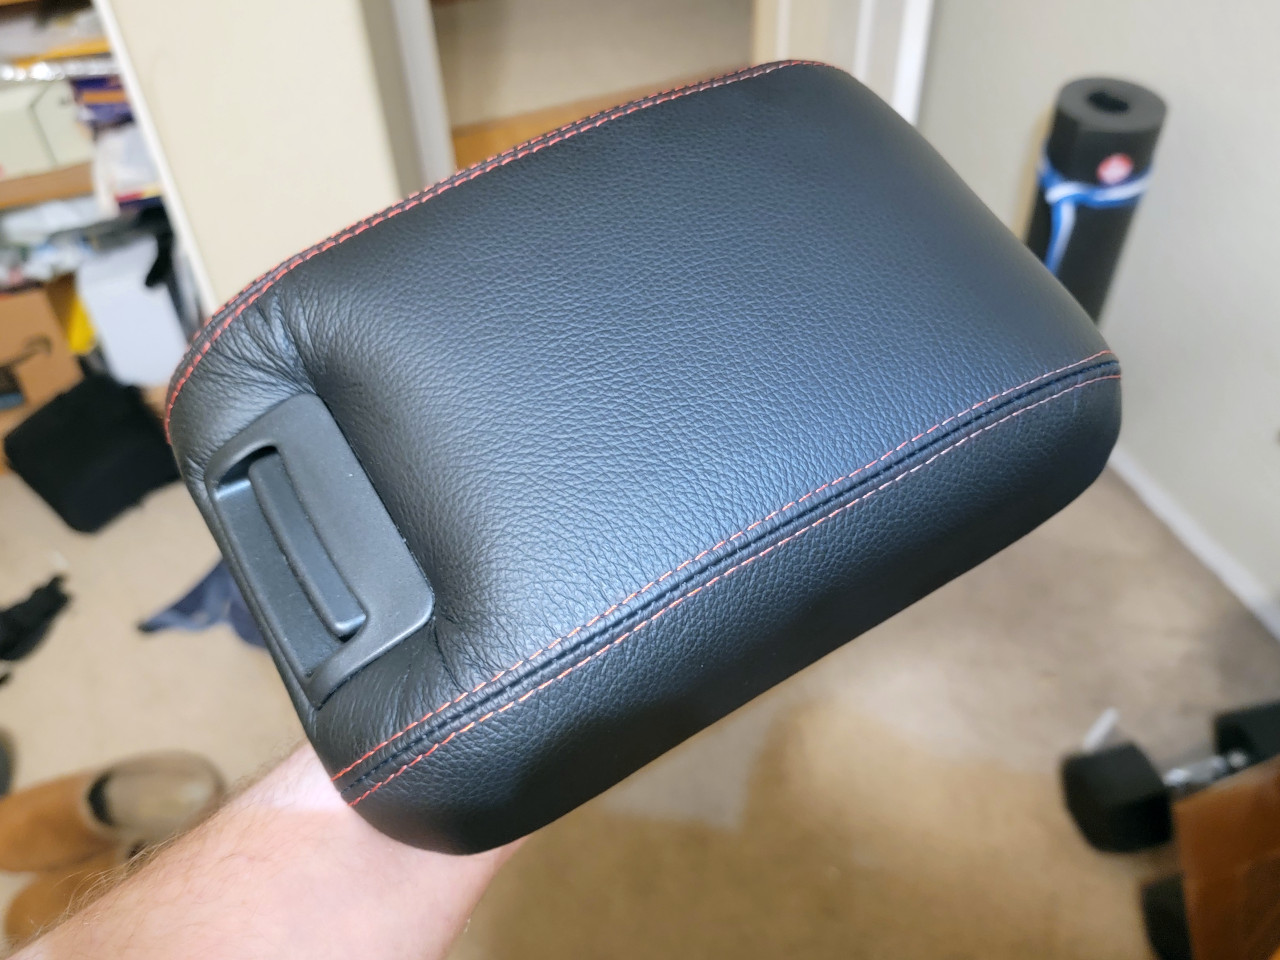 Installed armrest cover with padding